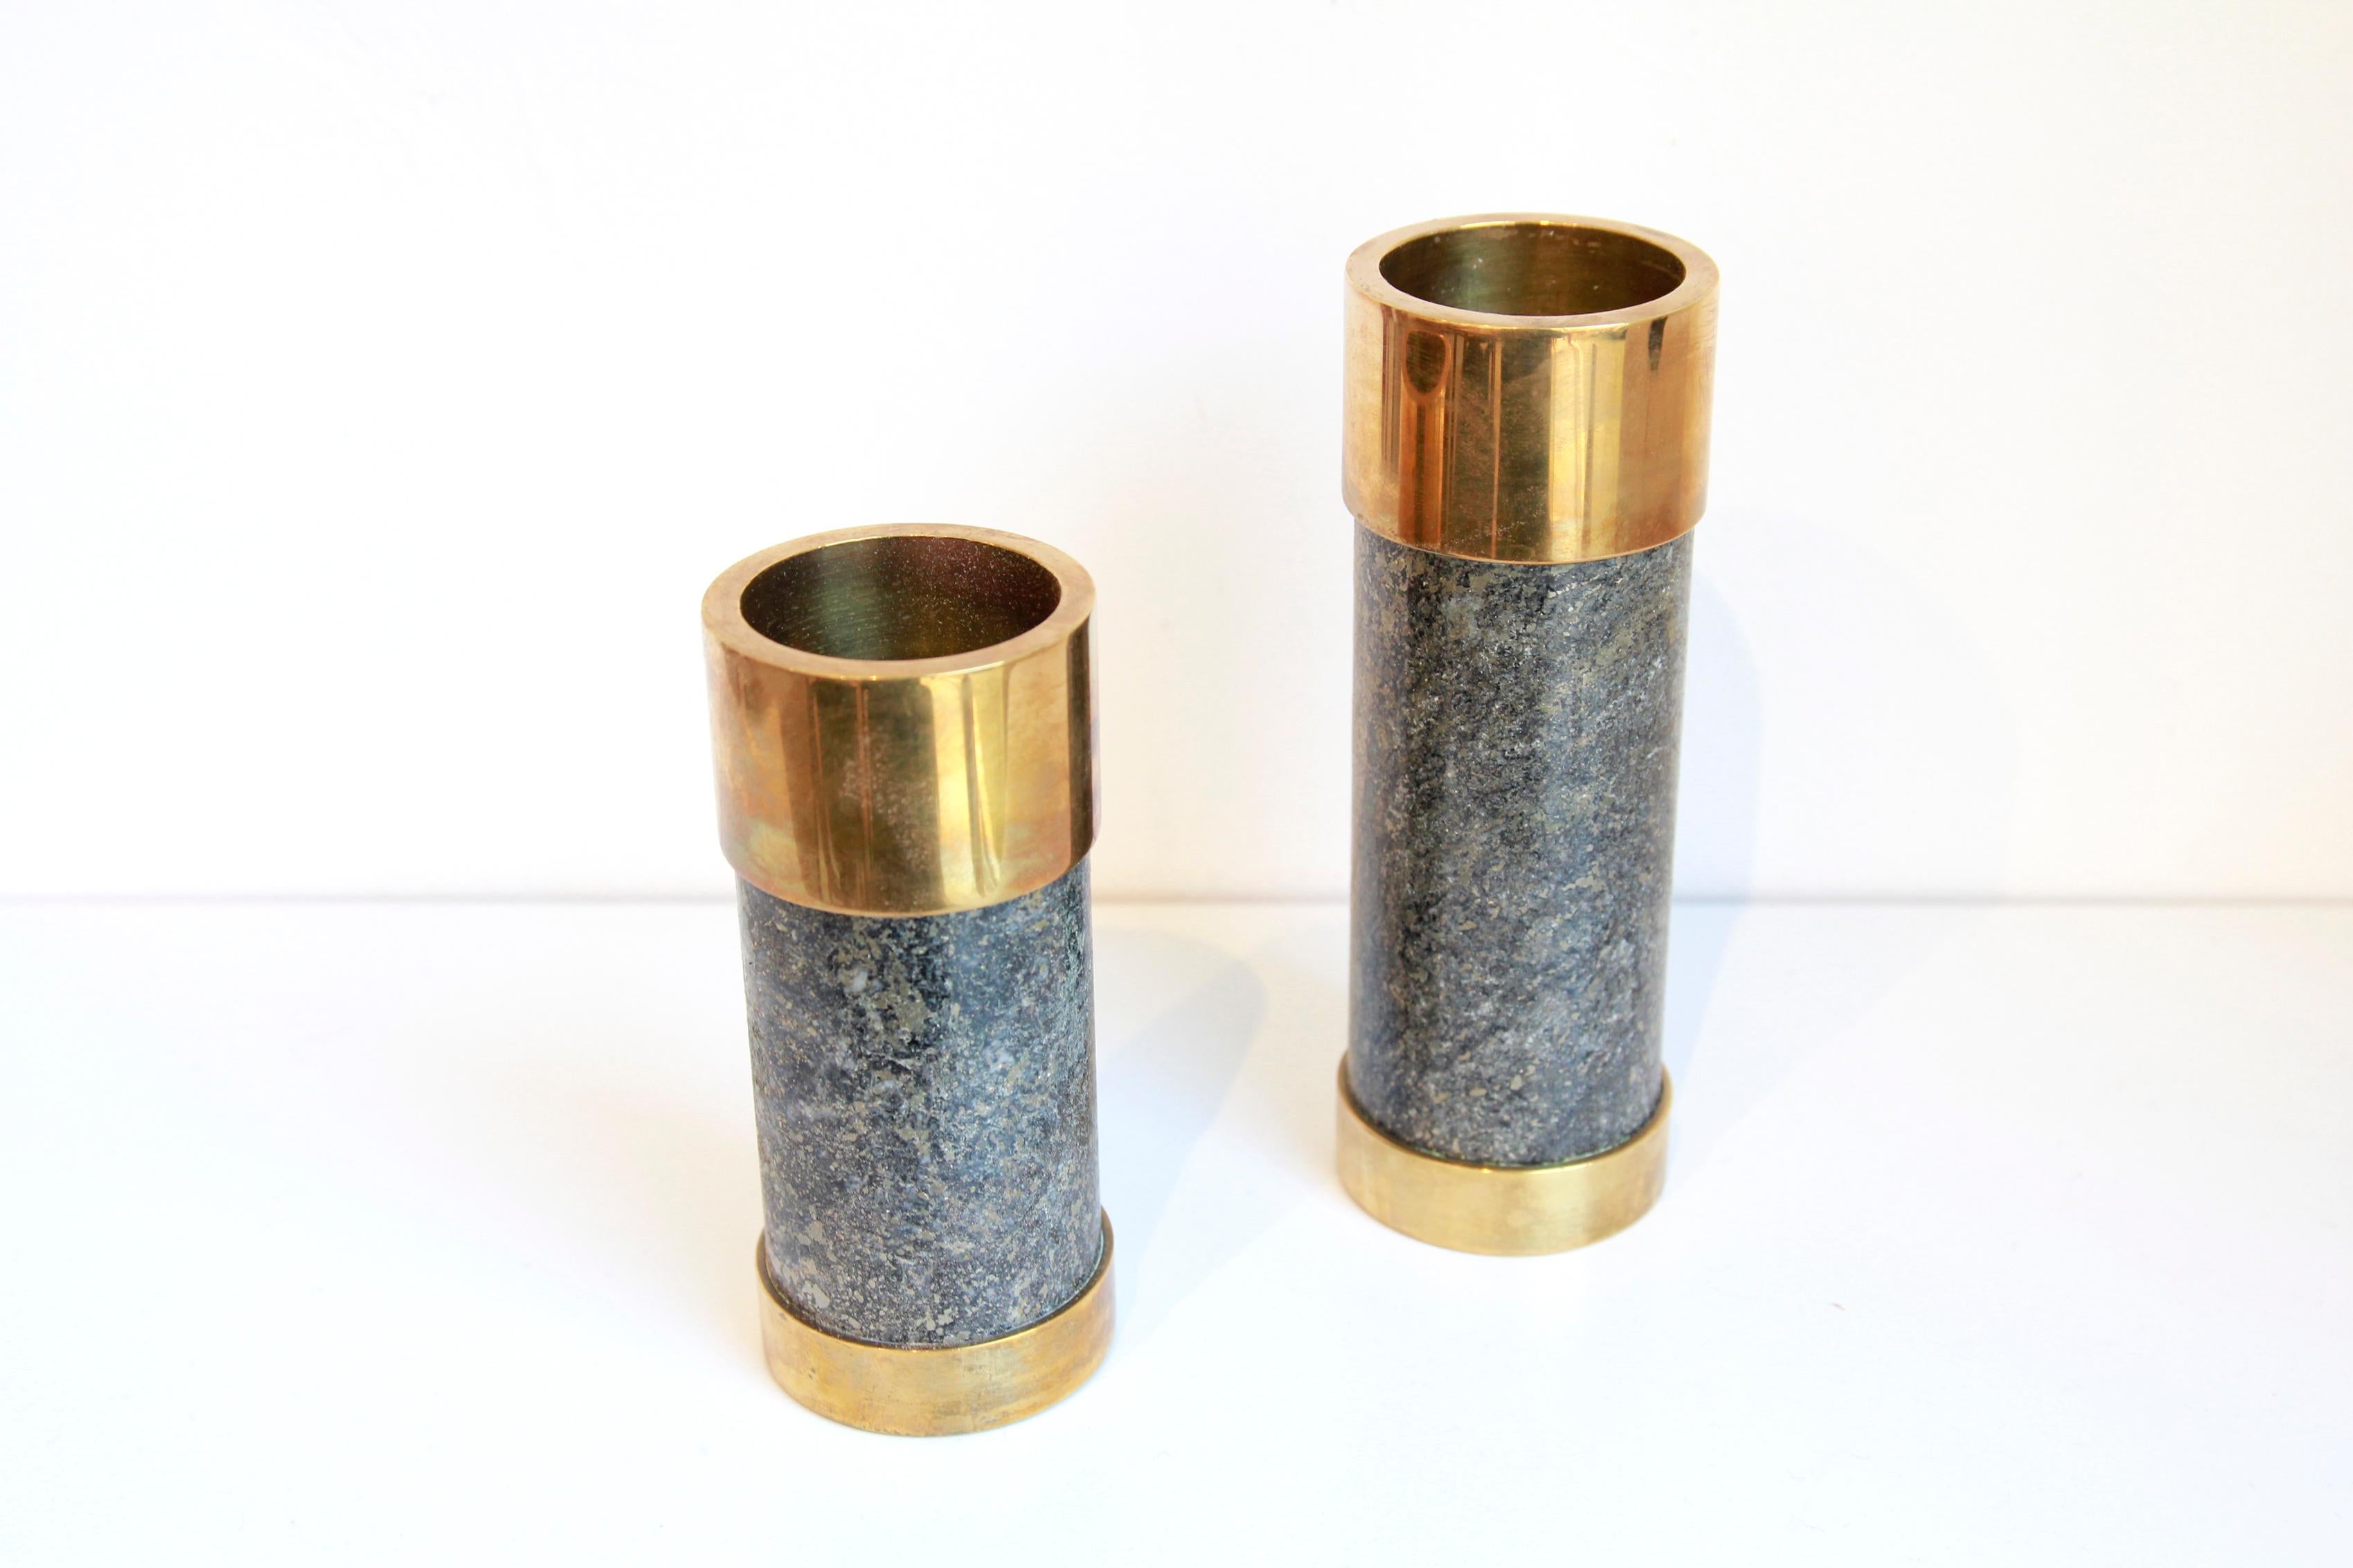 Two tealight holders made by Saulo AS in Sulitjelma, Norway. A Norwegian product from the 70s made of beautifully polished stone and brass edges on the top and bottom. The polished stone is ore from Sulitjelma. Much of this ore comes from the